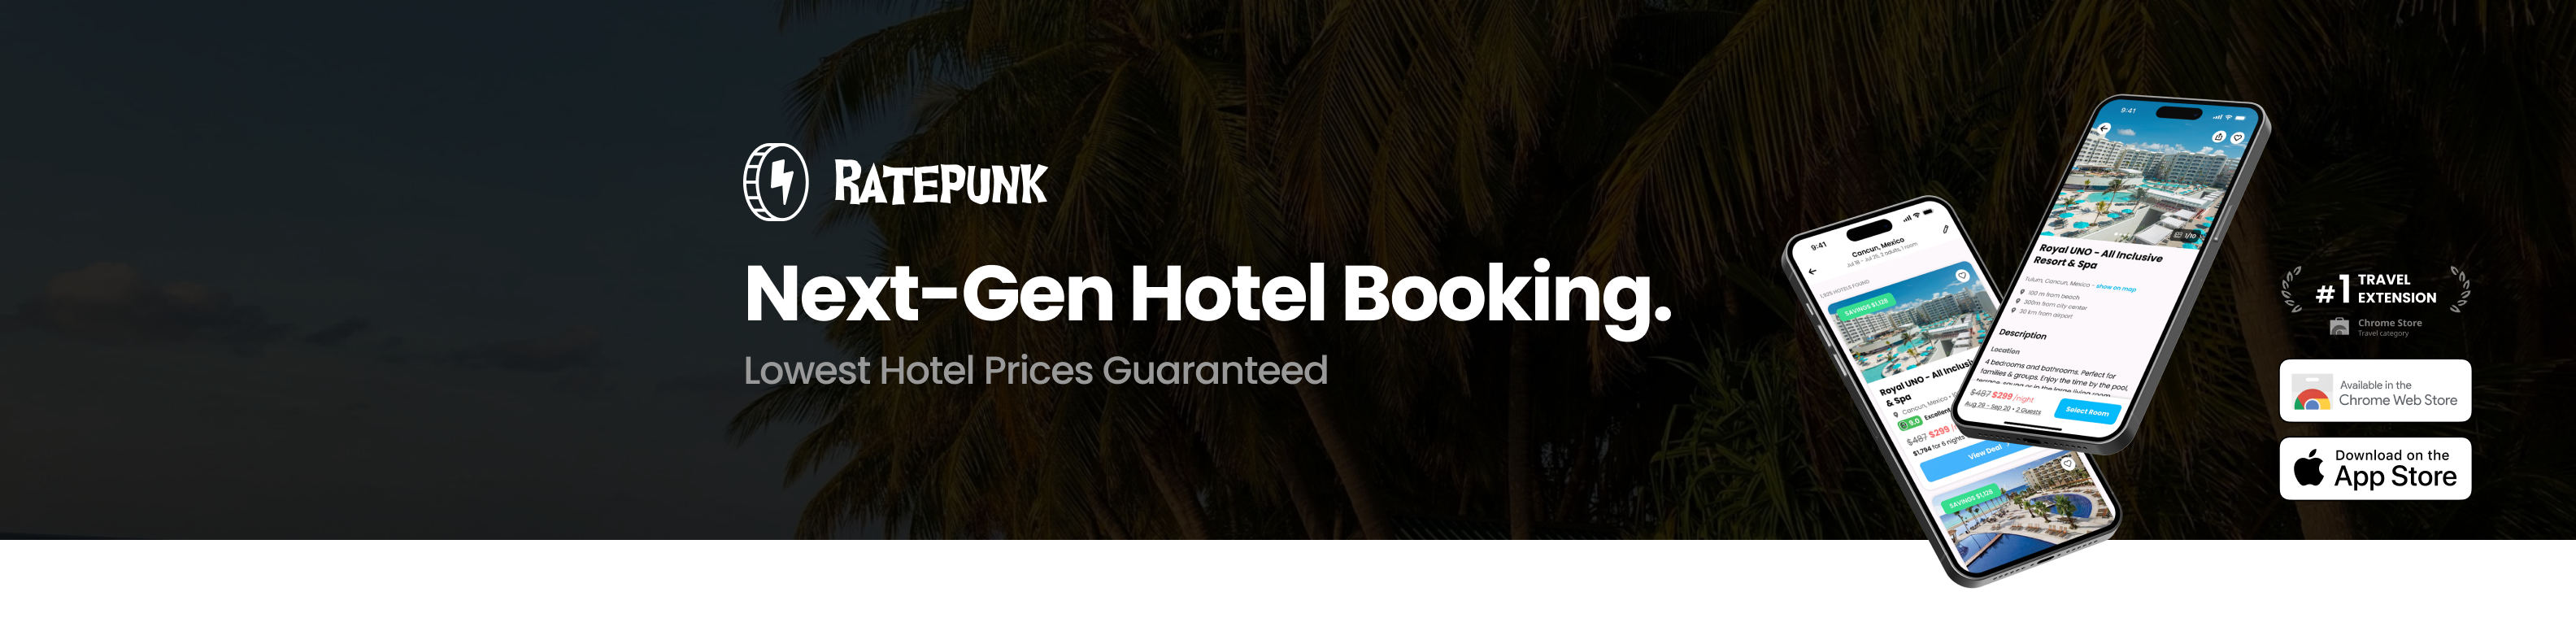 ratepunk - hotel booking site compare prices and find best deal